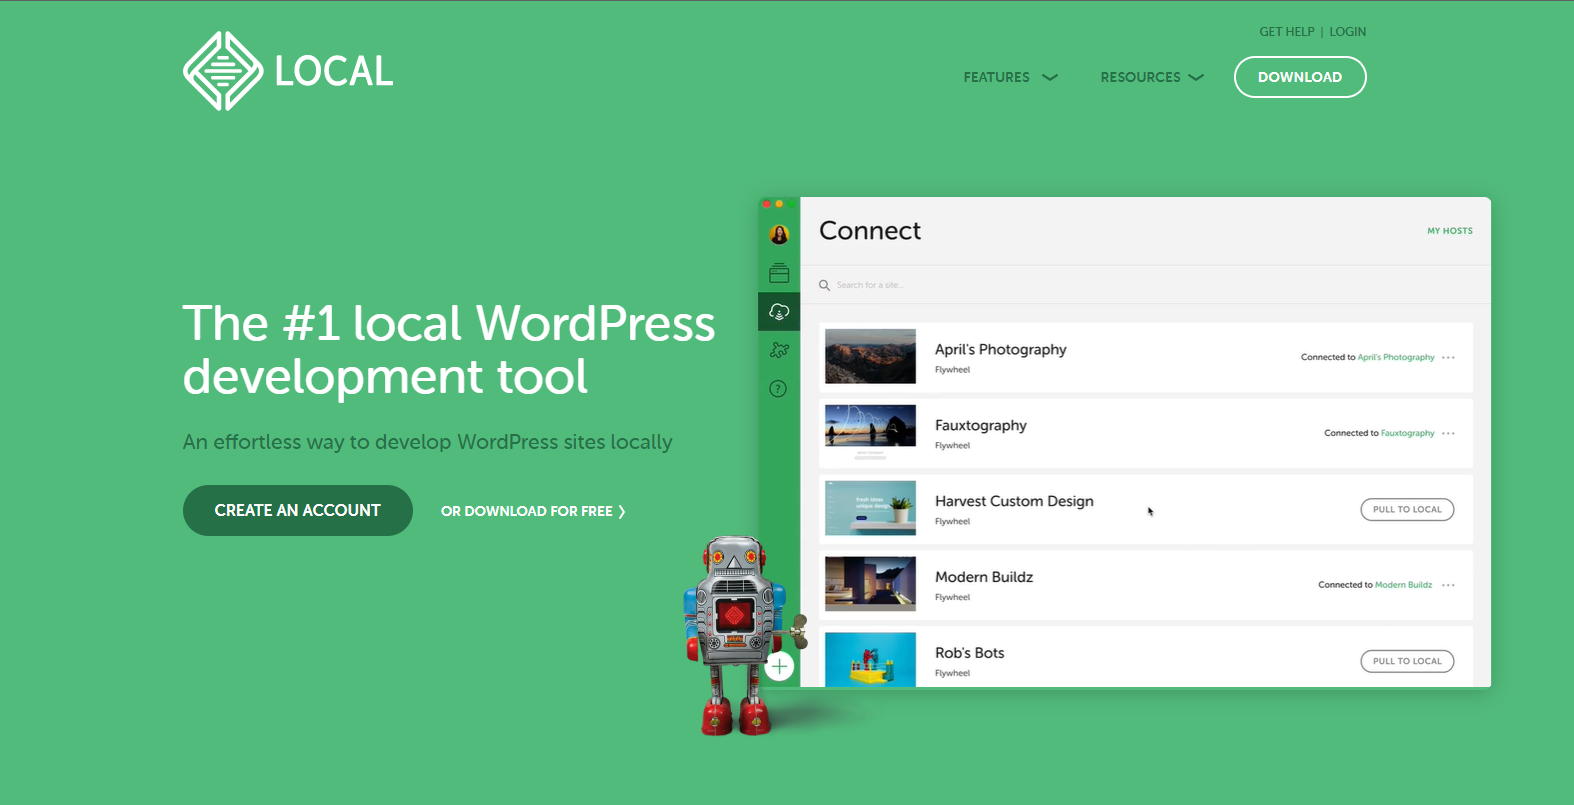 How to Install WordPress locally on your laptop using LocalWP [Tutorial]